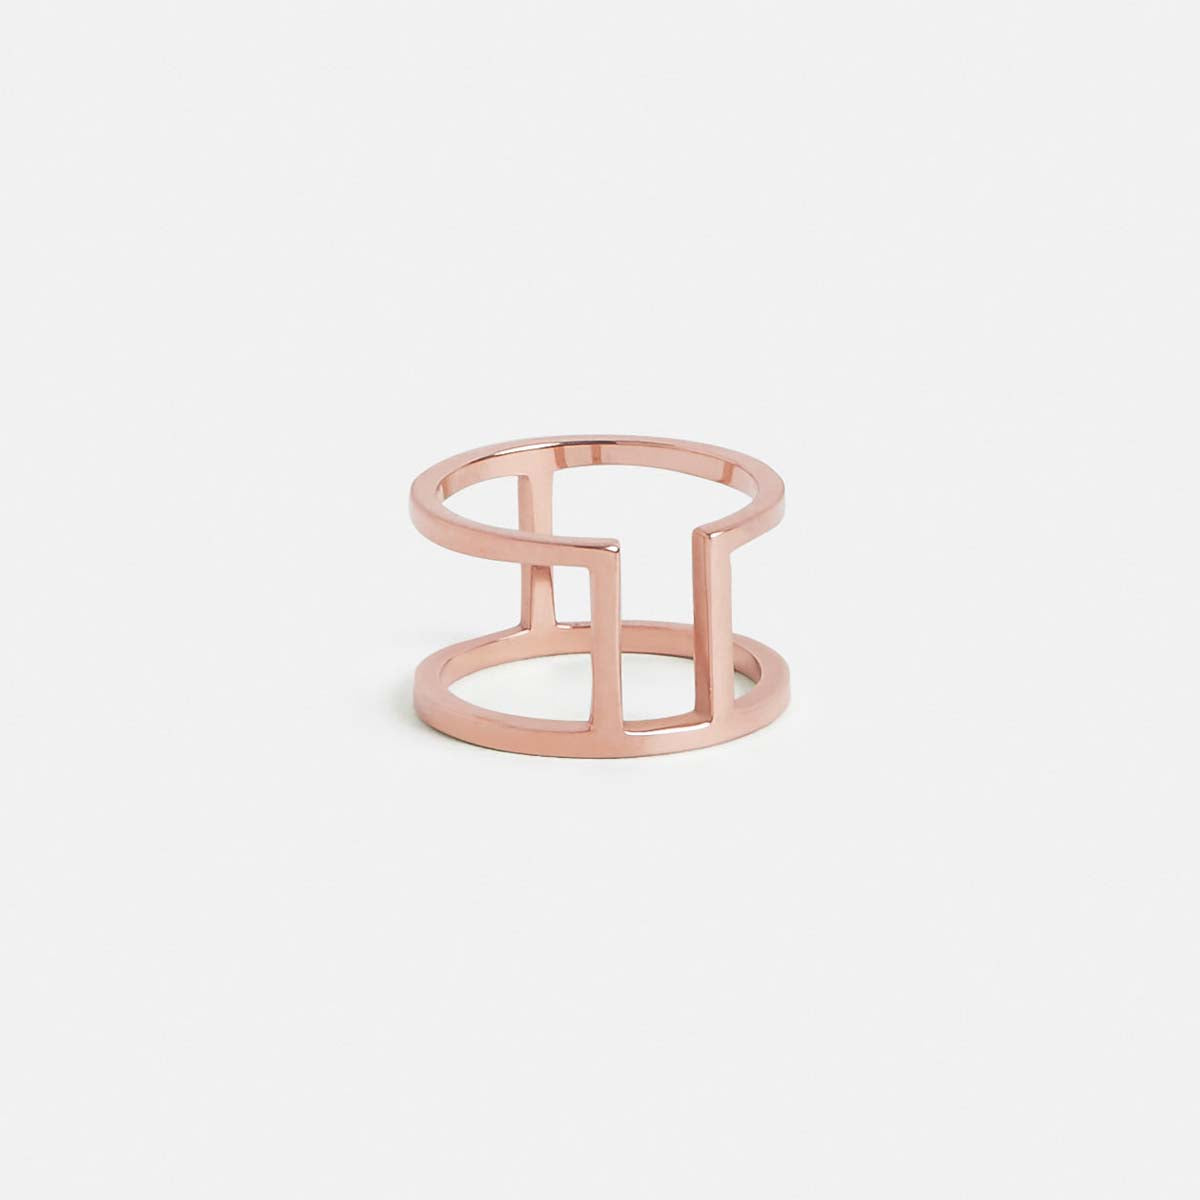  Cote Non-Traditional Ring in 14k Rose Gold by SHW Fine Jewelry New York City